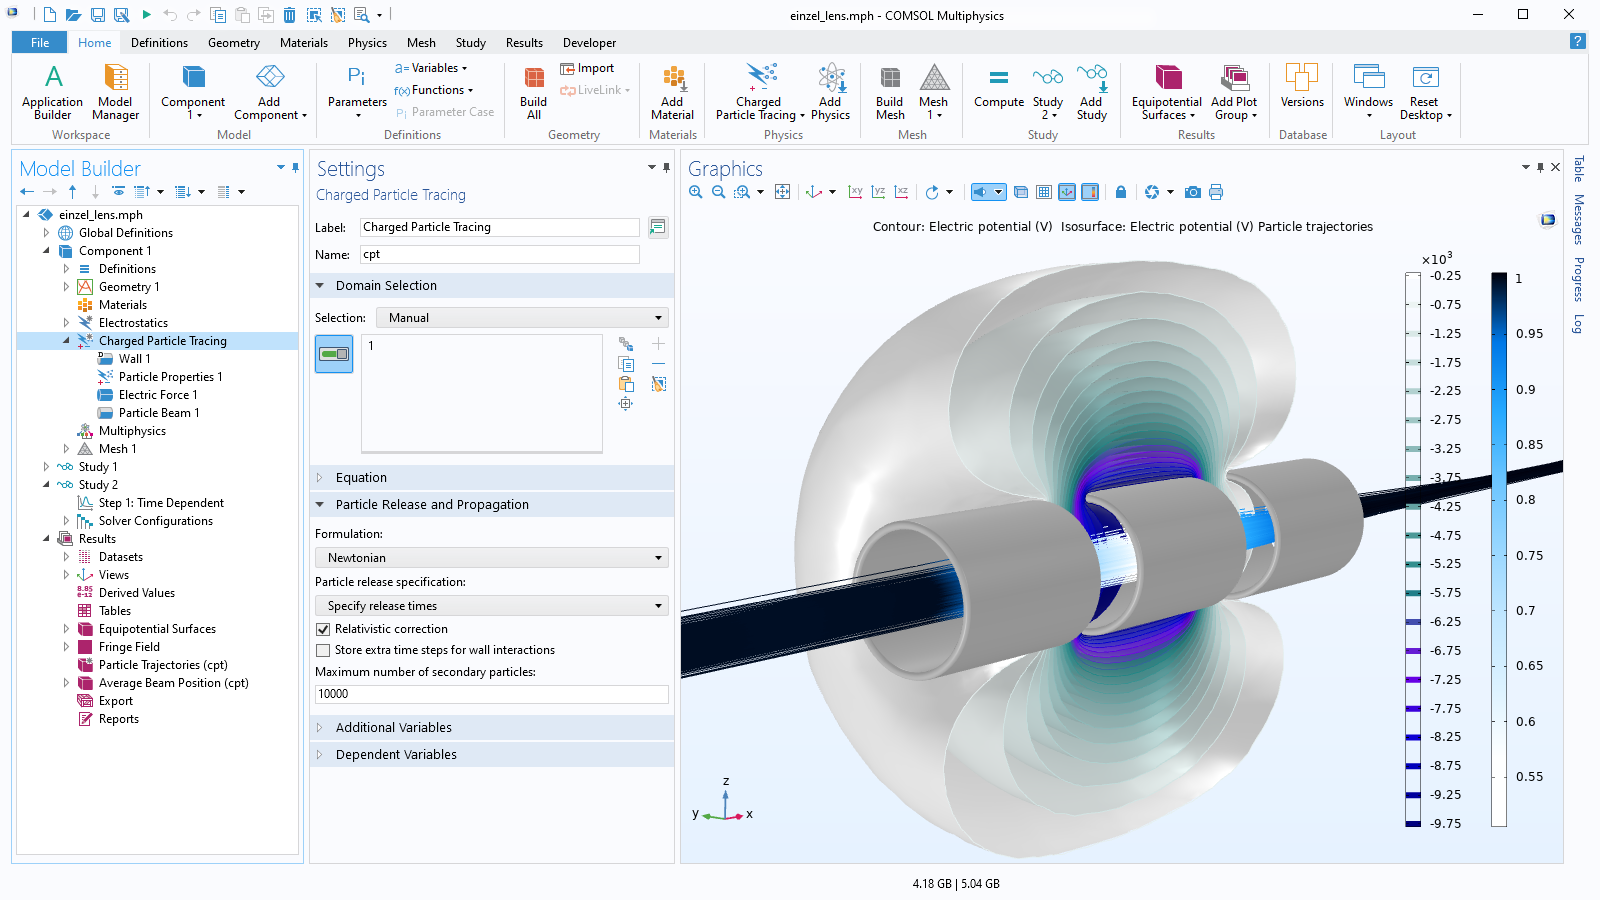 The COMSOL Multiphysics UI showing the Model Builder with the Charged Particle Tracing node highlighted, the corresponding Settings window, and an einzel lens model in the Graphics window.